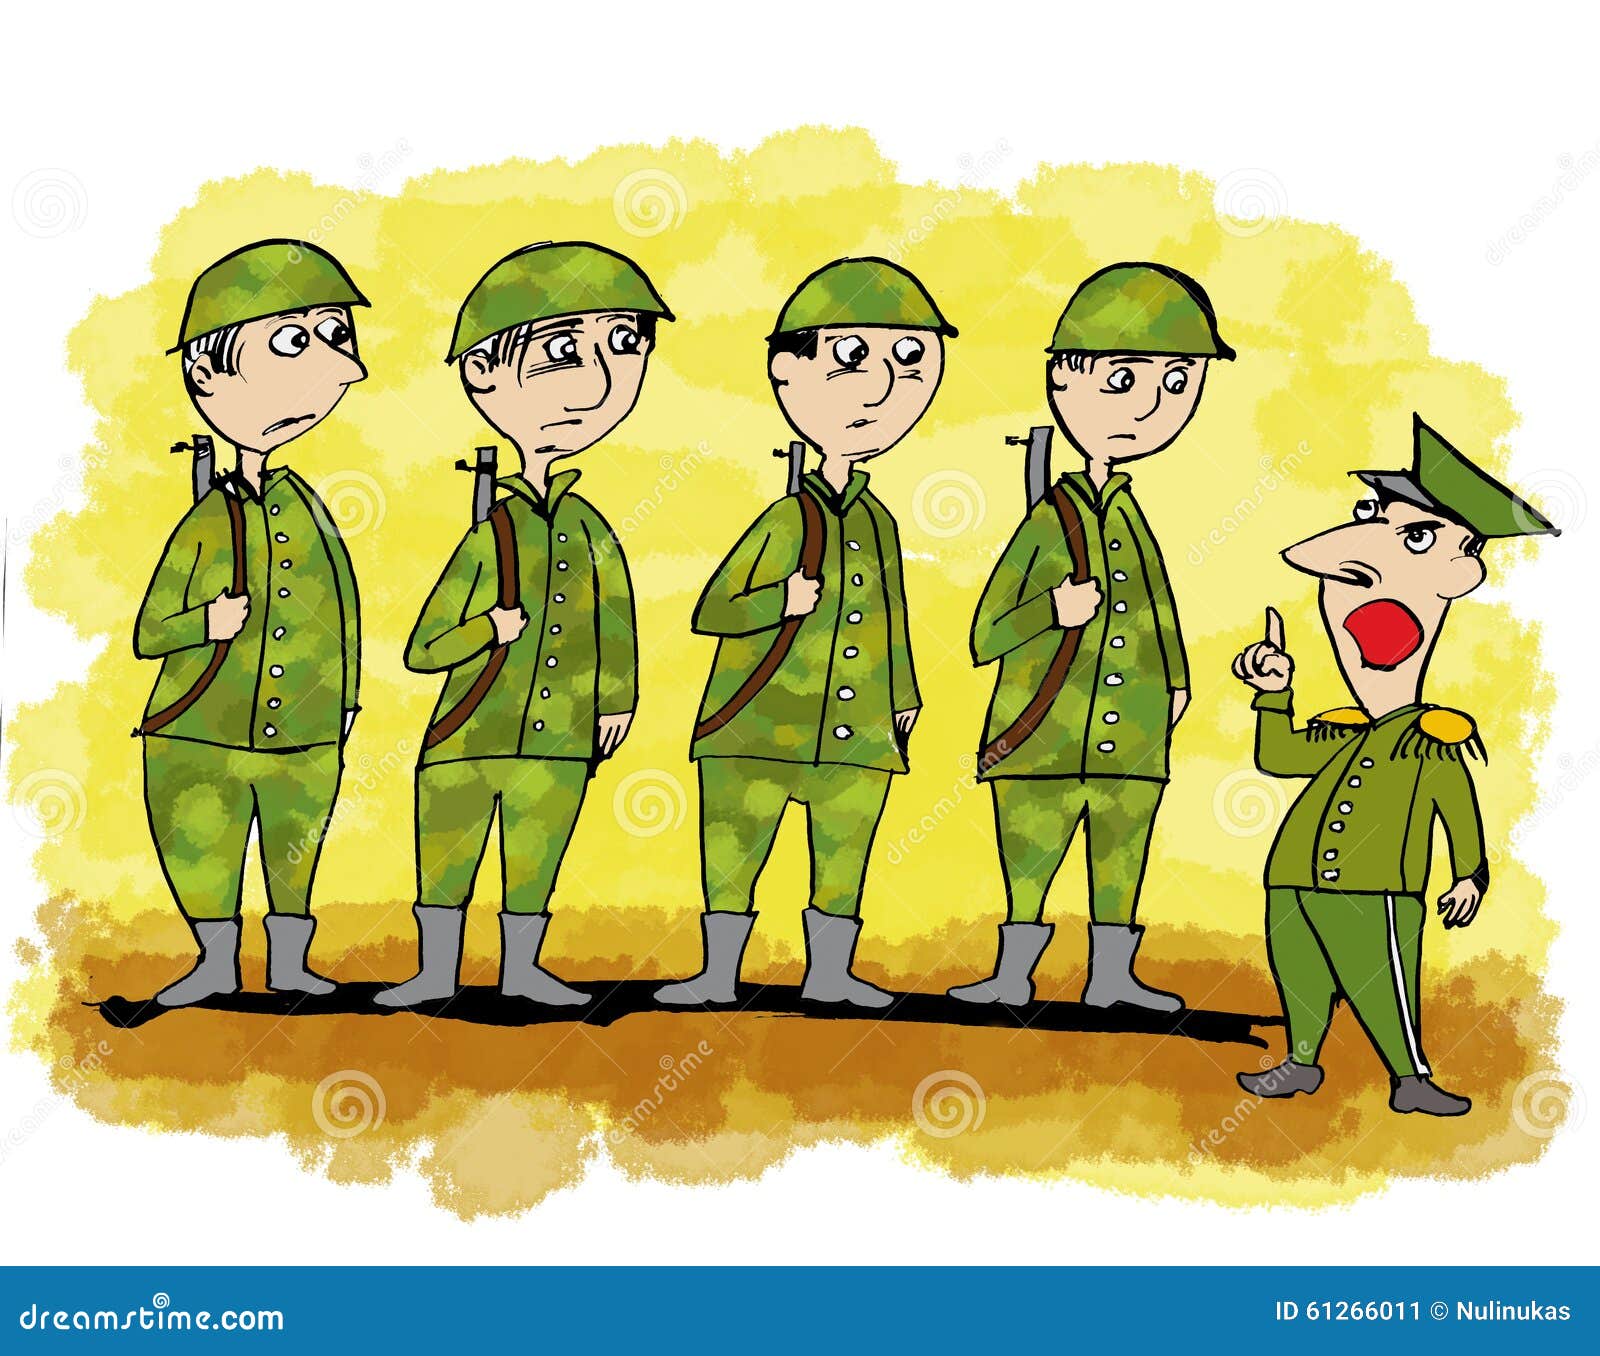 Cartoon Related With Military Man Stock Illustration - Image: 61266011